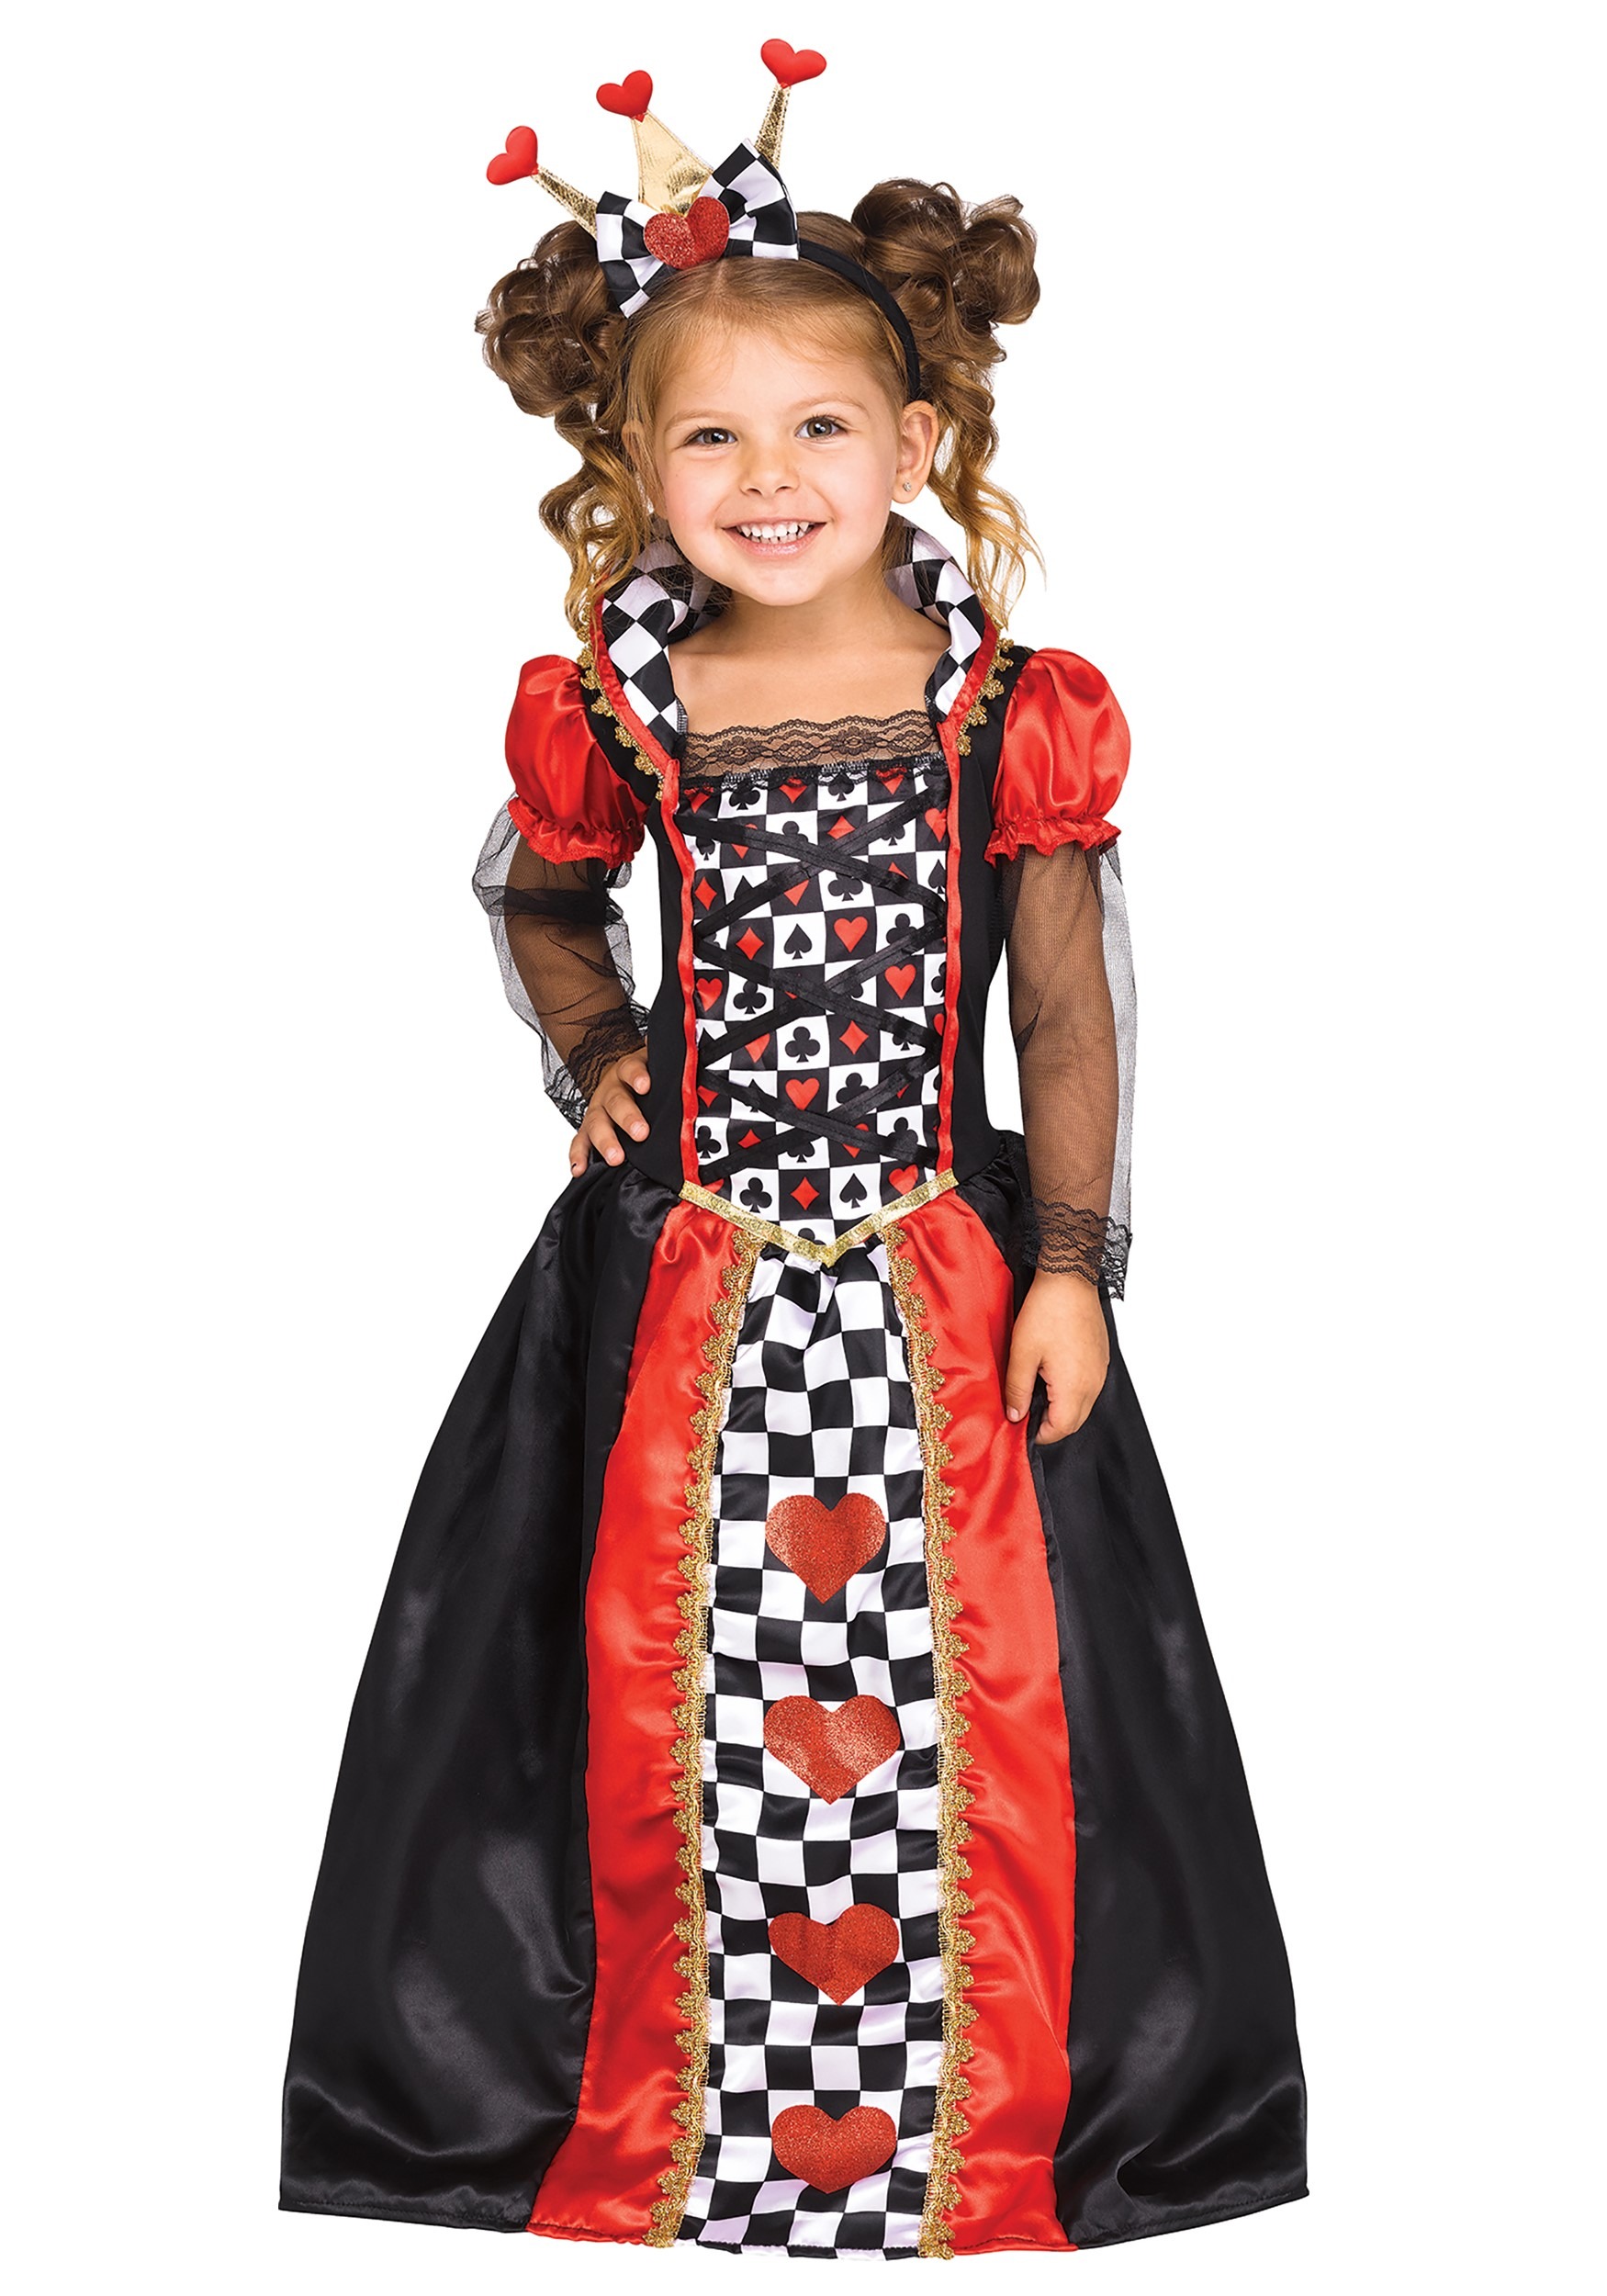 Photos - Fancy Dress Toddler Fun World Queen of Hearts Character  Costume Black/Red/Whit 